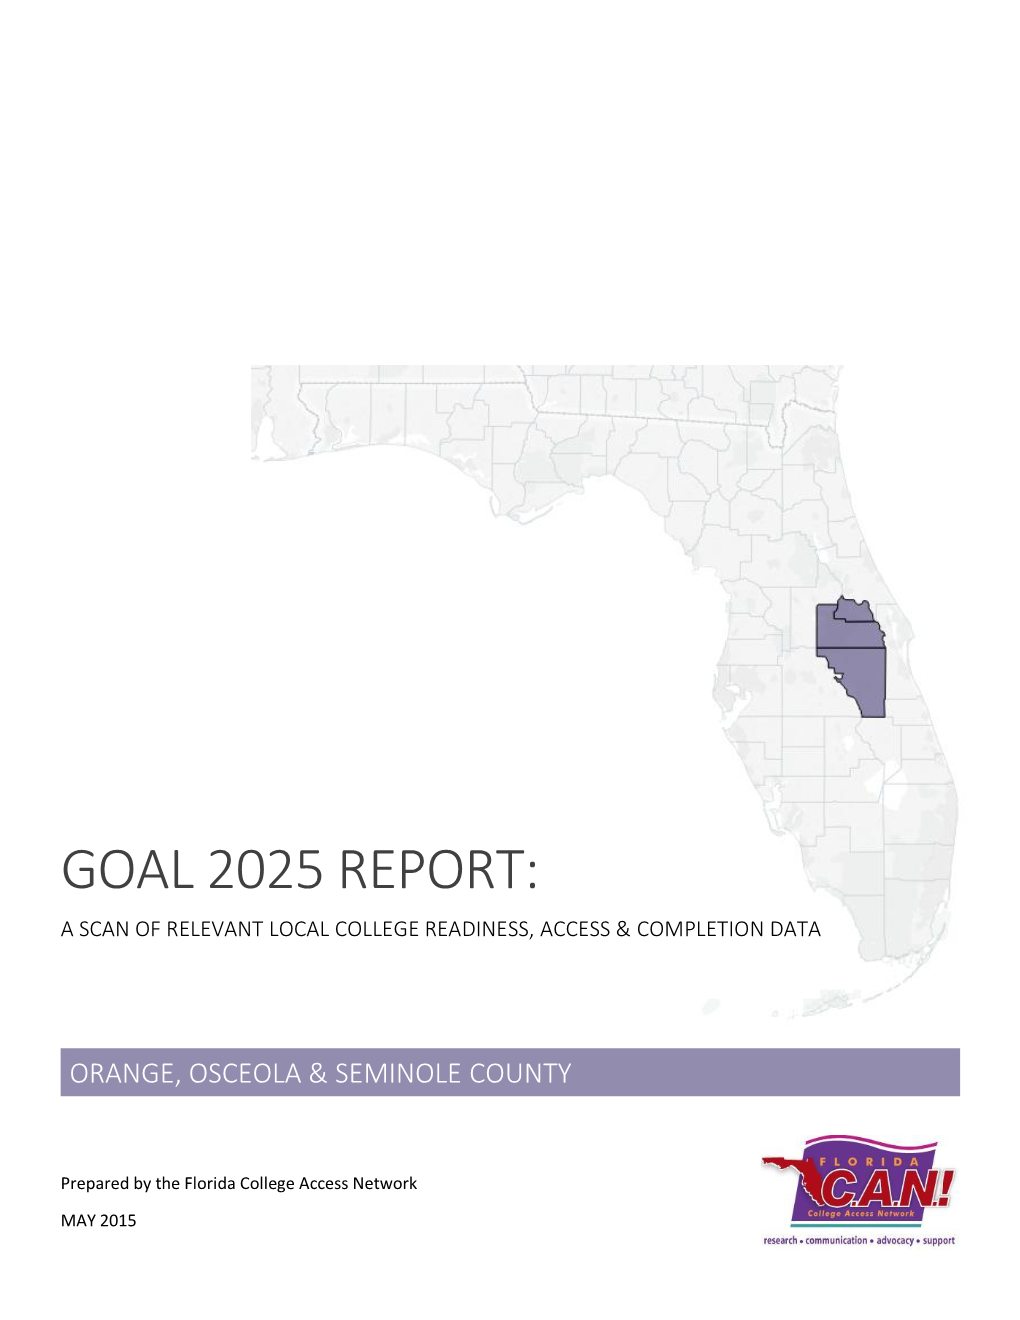 Goal 2025 Report: a Scan of Relevant Local College Readiness, Access & Completion Data